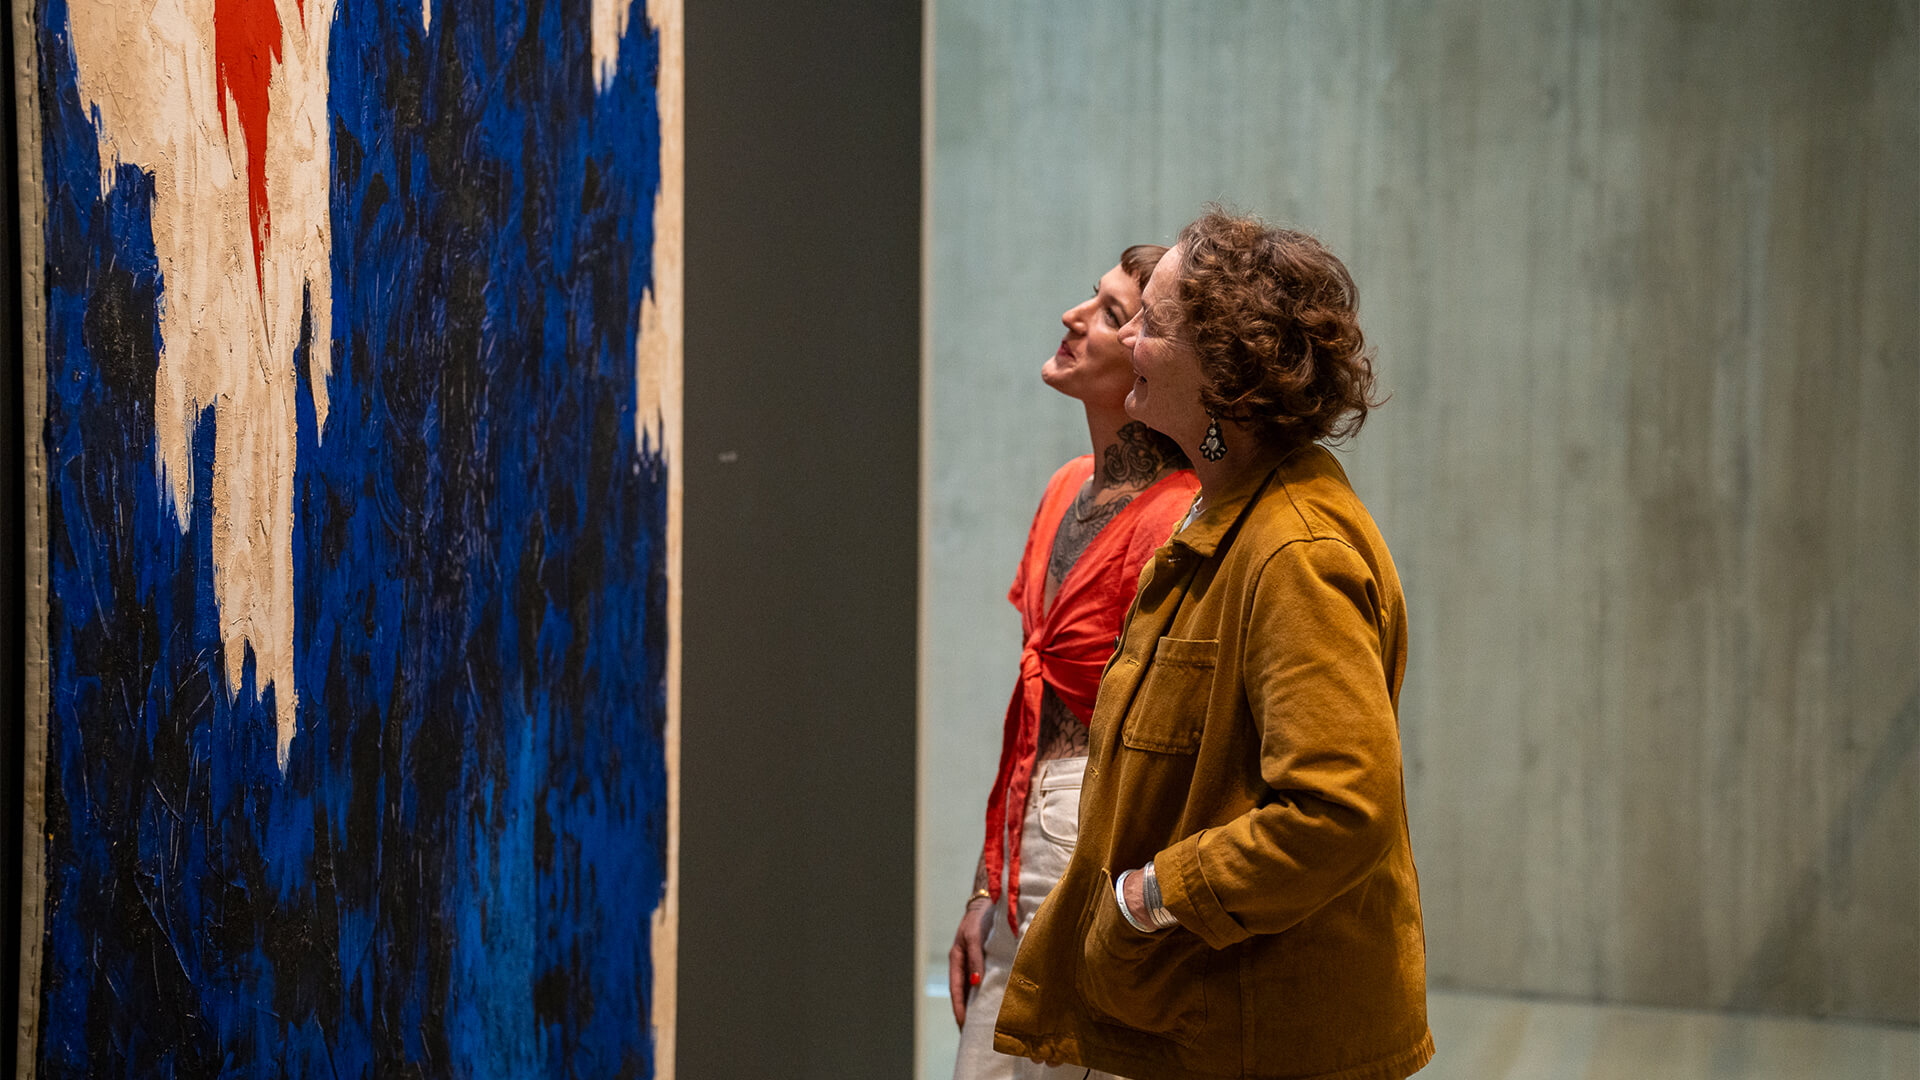 Two women look up at an abstract blue, white, black and orange painting and smile